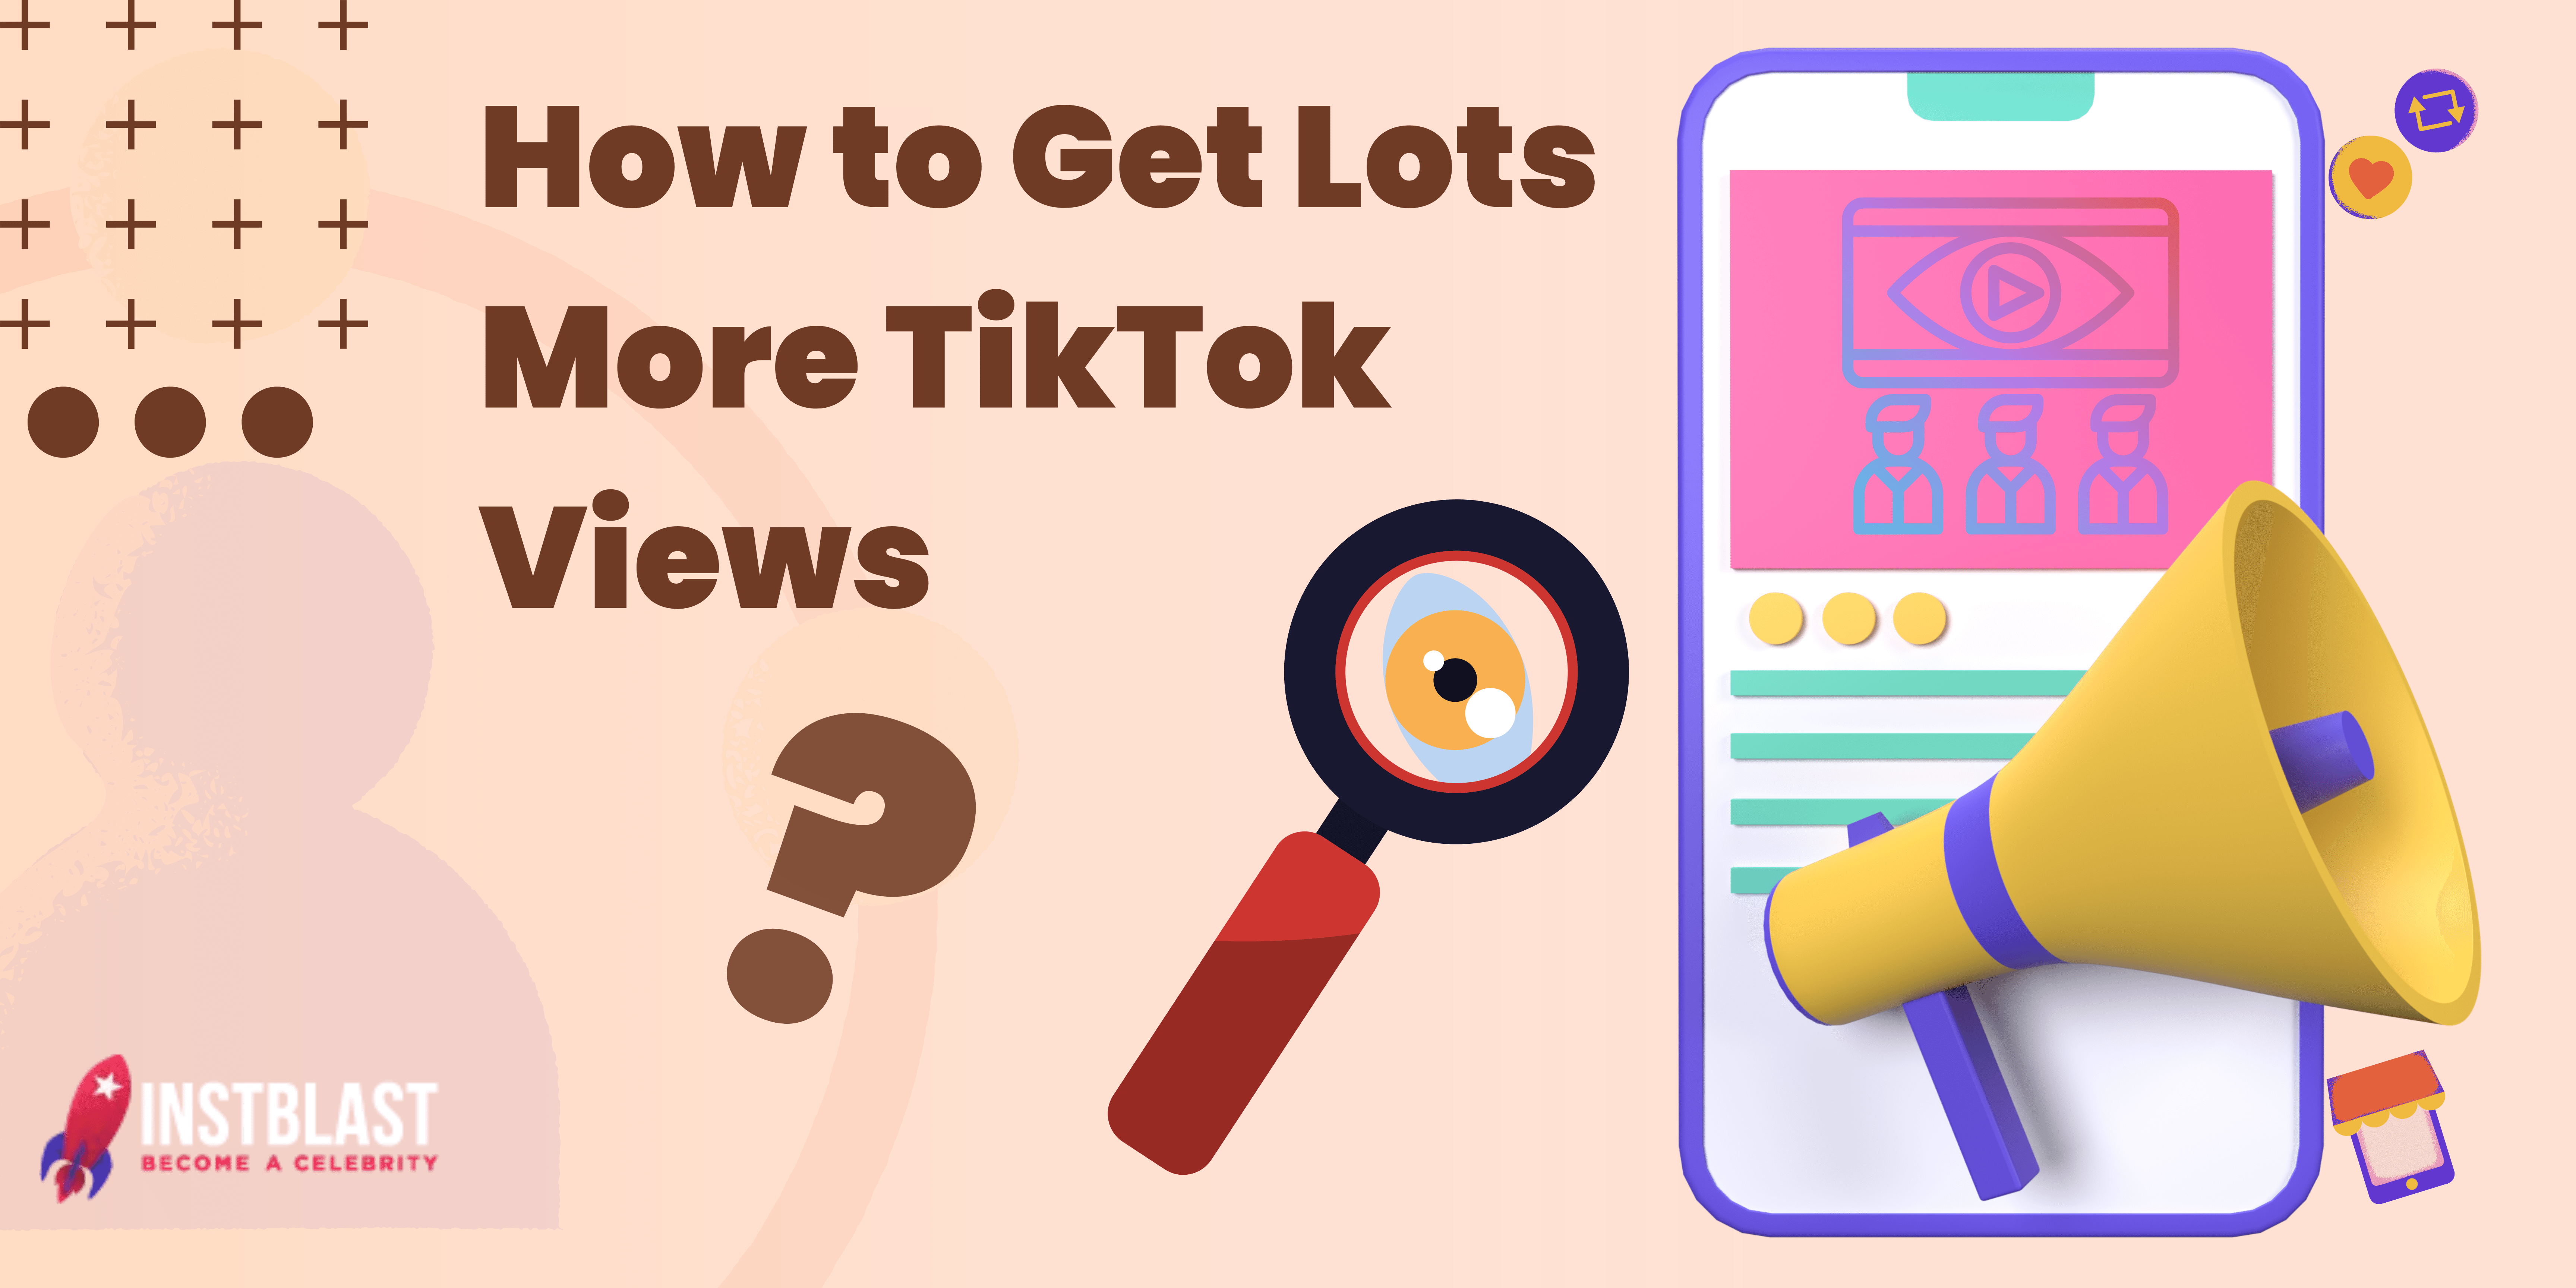 How to Get Lots More TikTok Views: Step-by-Step Guide